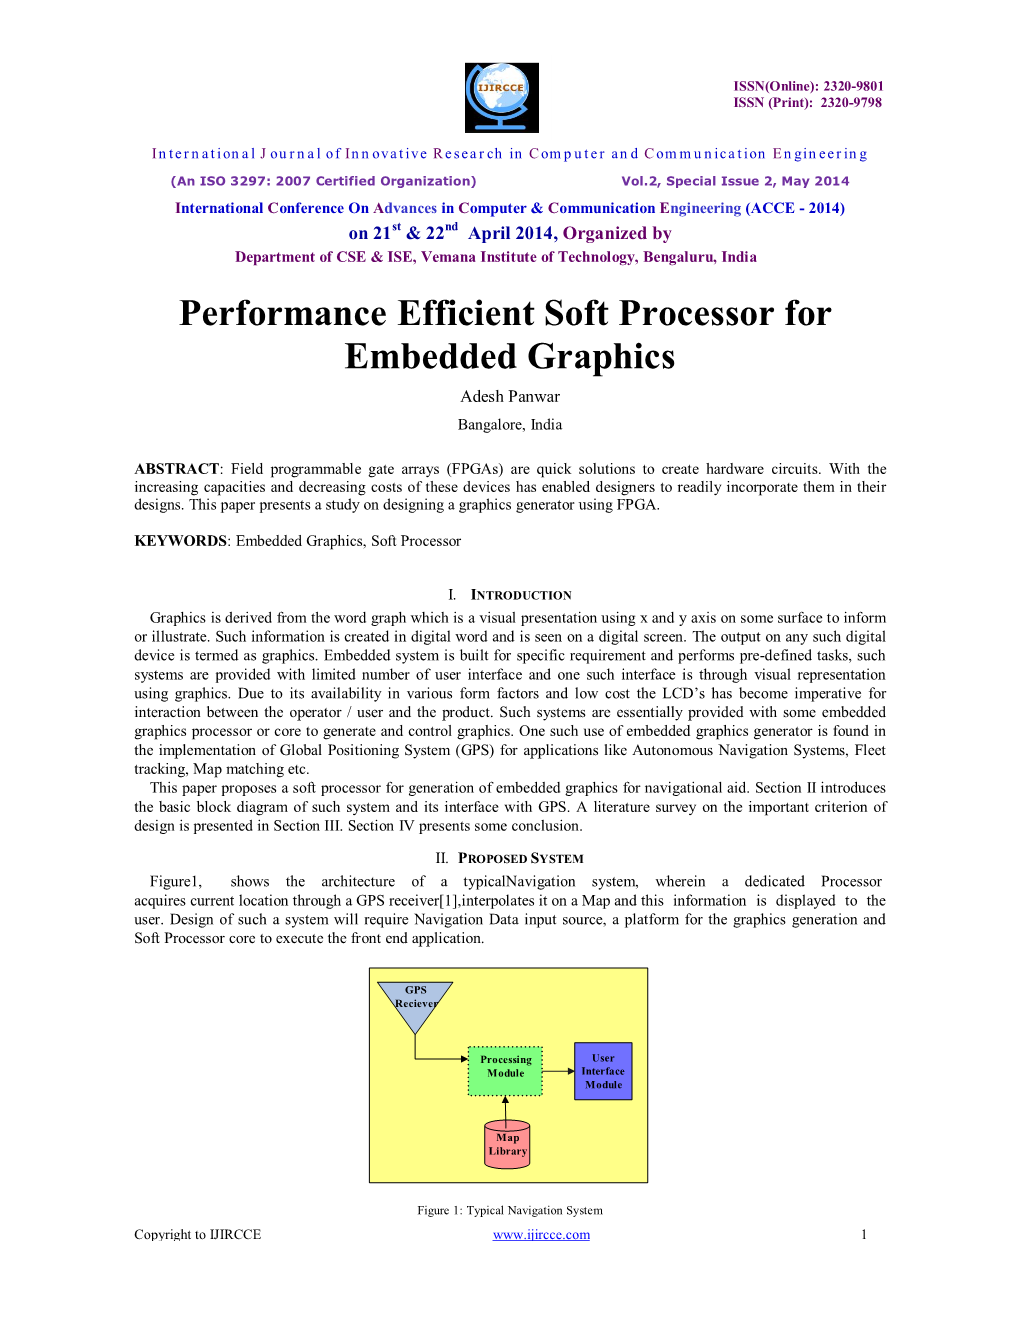 Performance Efficient Soft Processor for Embedded Graphics Adesh Panwar Bangalore, India